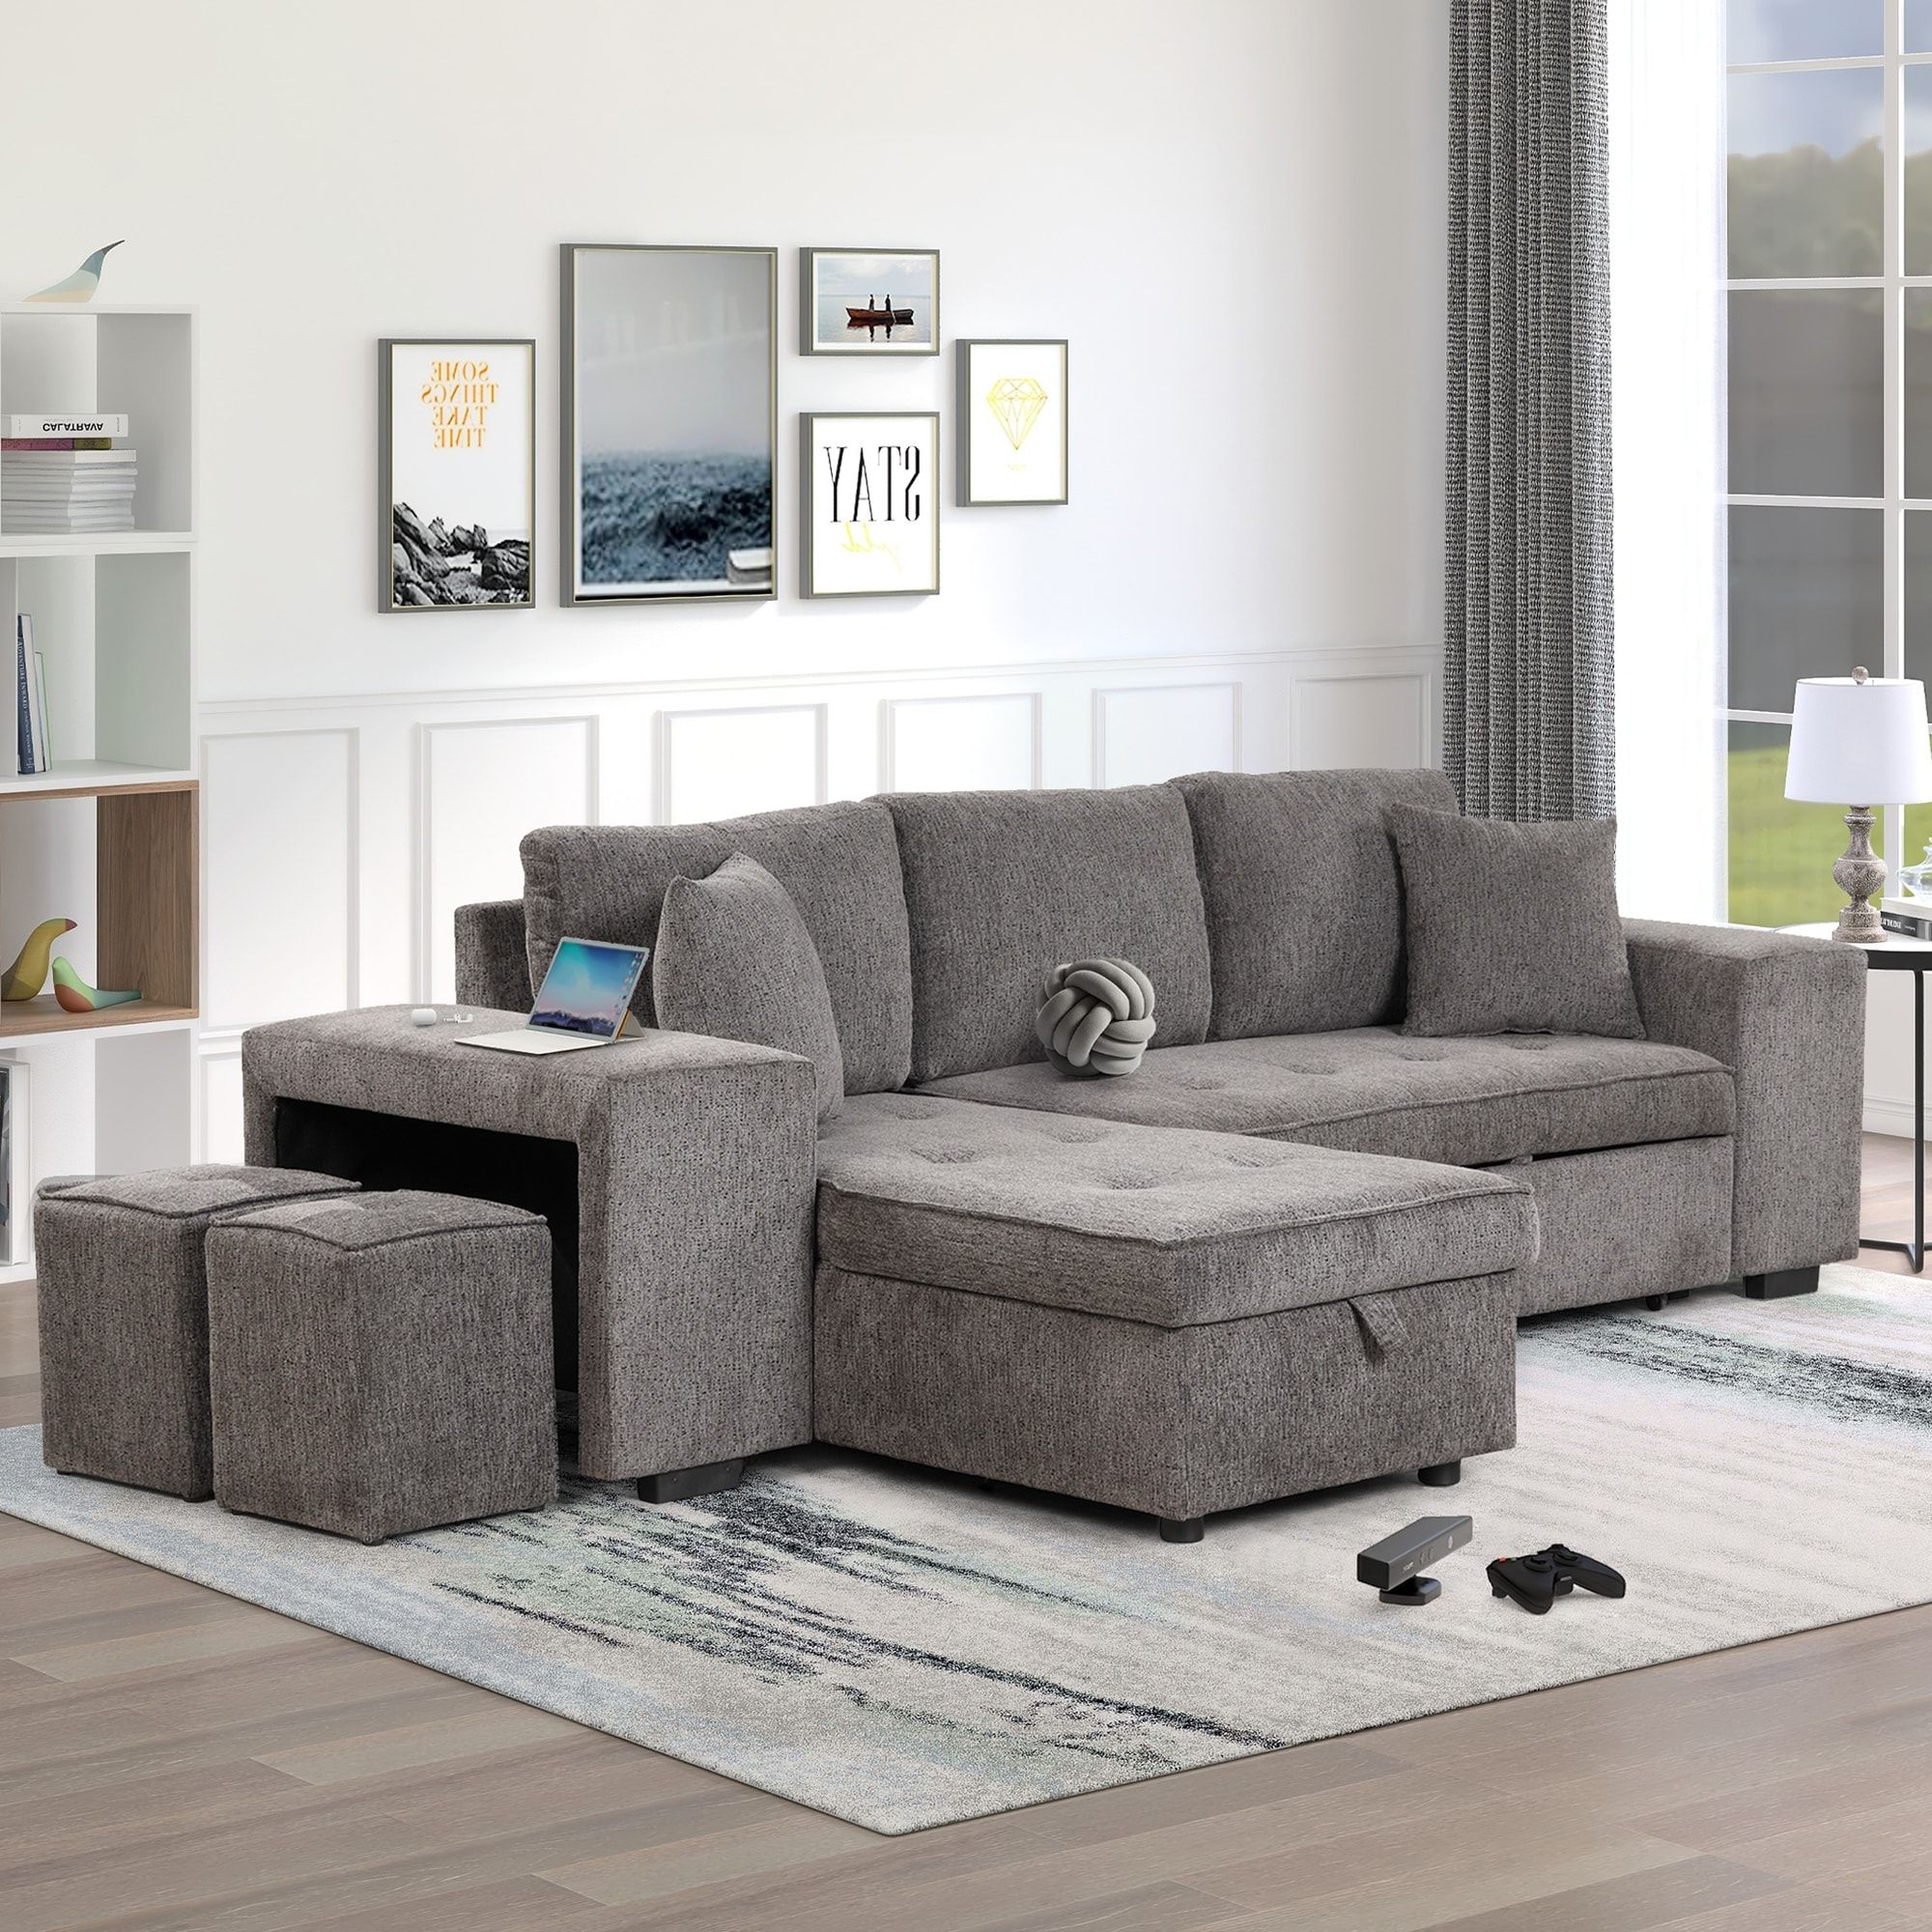 104" L Shape 3 Seat Reversible Sectional Sofa, Pull Out Sleeper Sofa With  Storage Chaise And 2 Stools For Living Room – Overstock – 37989258 Throughout 3 Seat Sofa Sectionals With Reversible Chaise (Gallery 6 of 20)